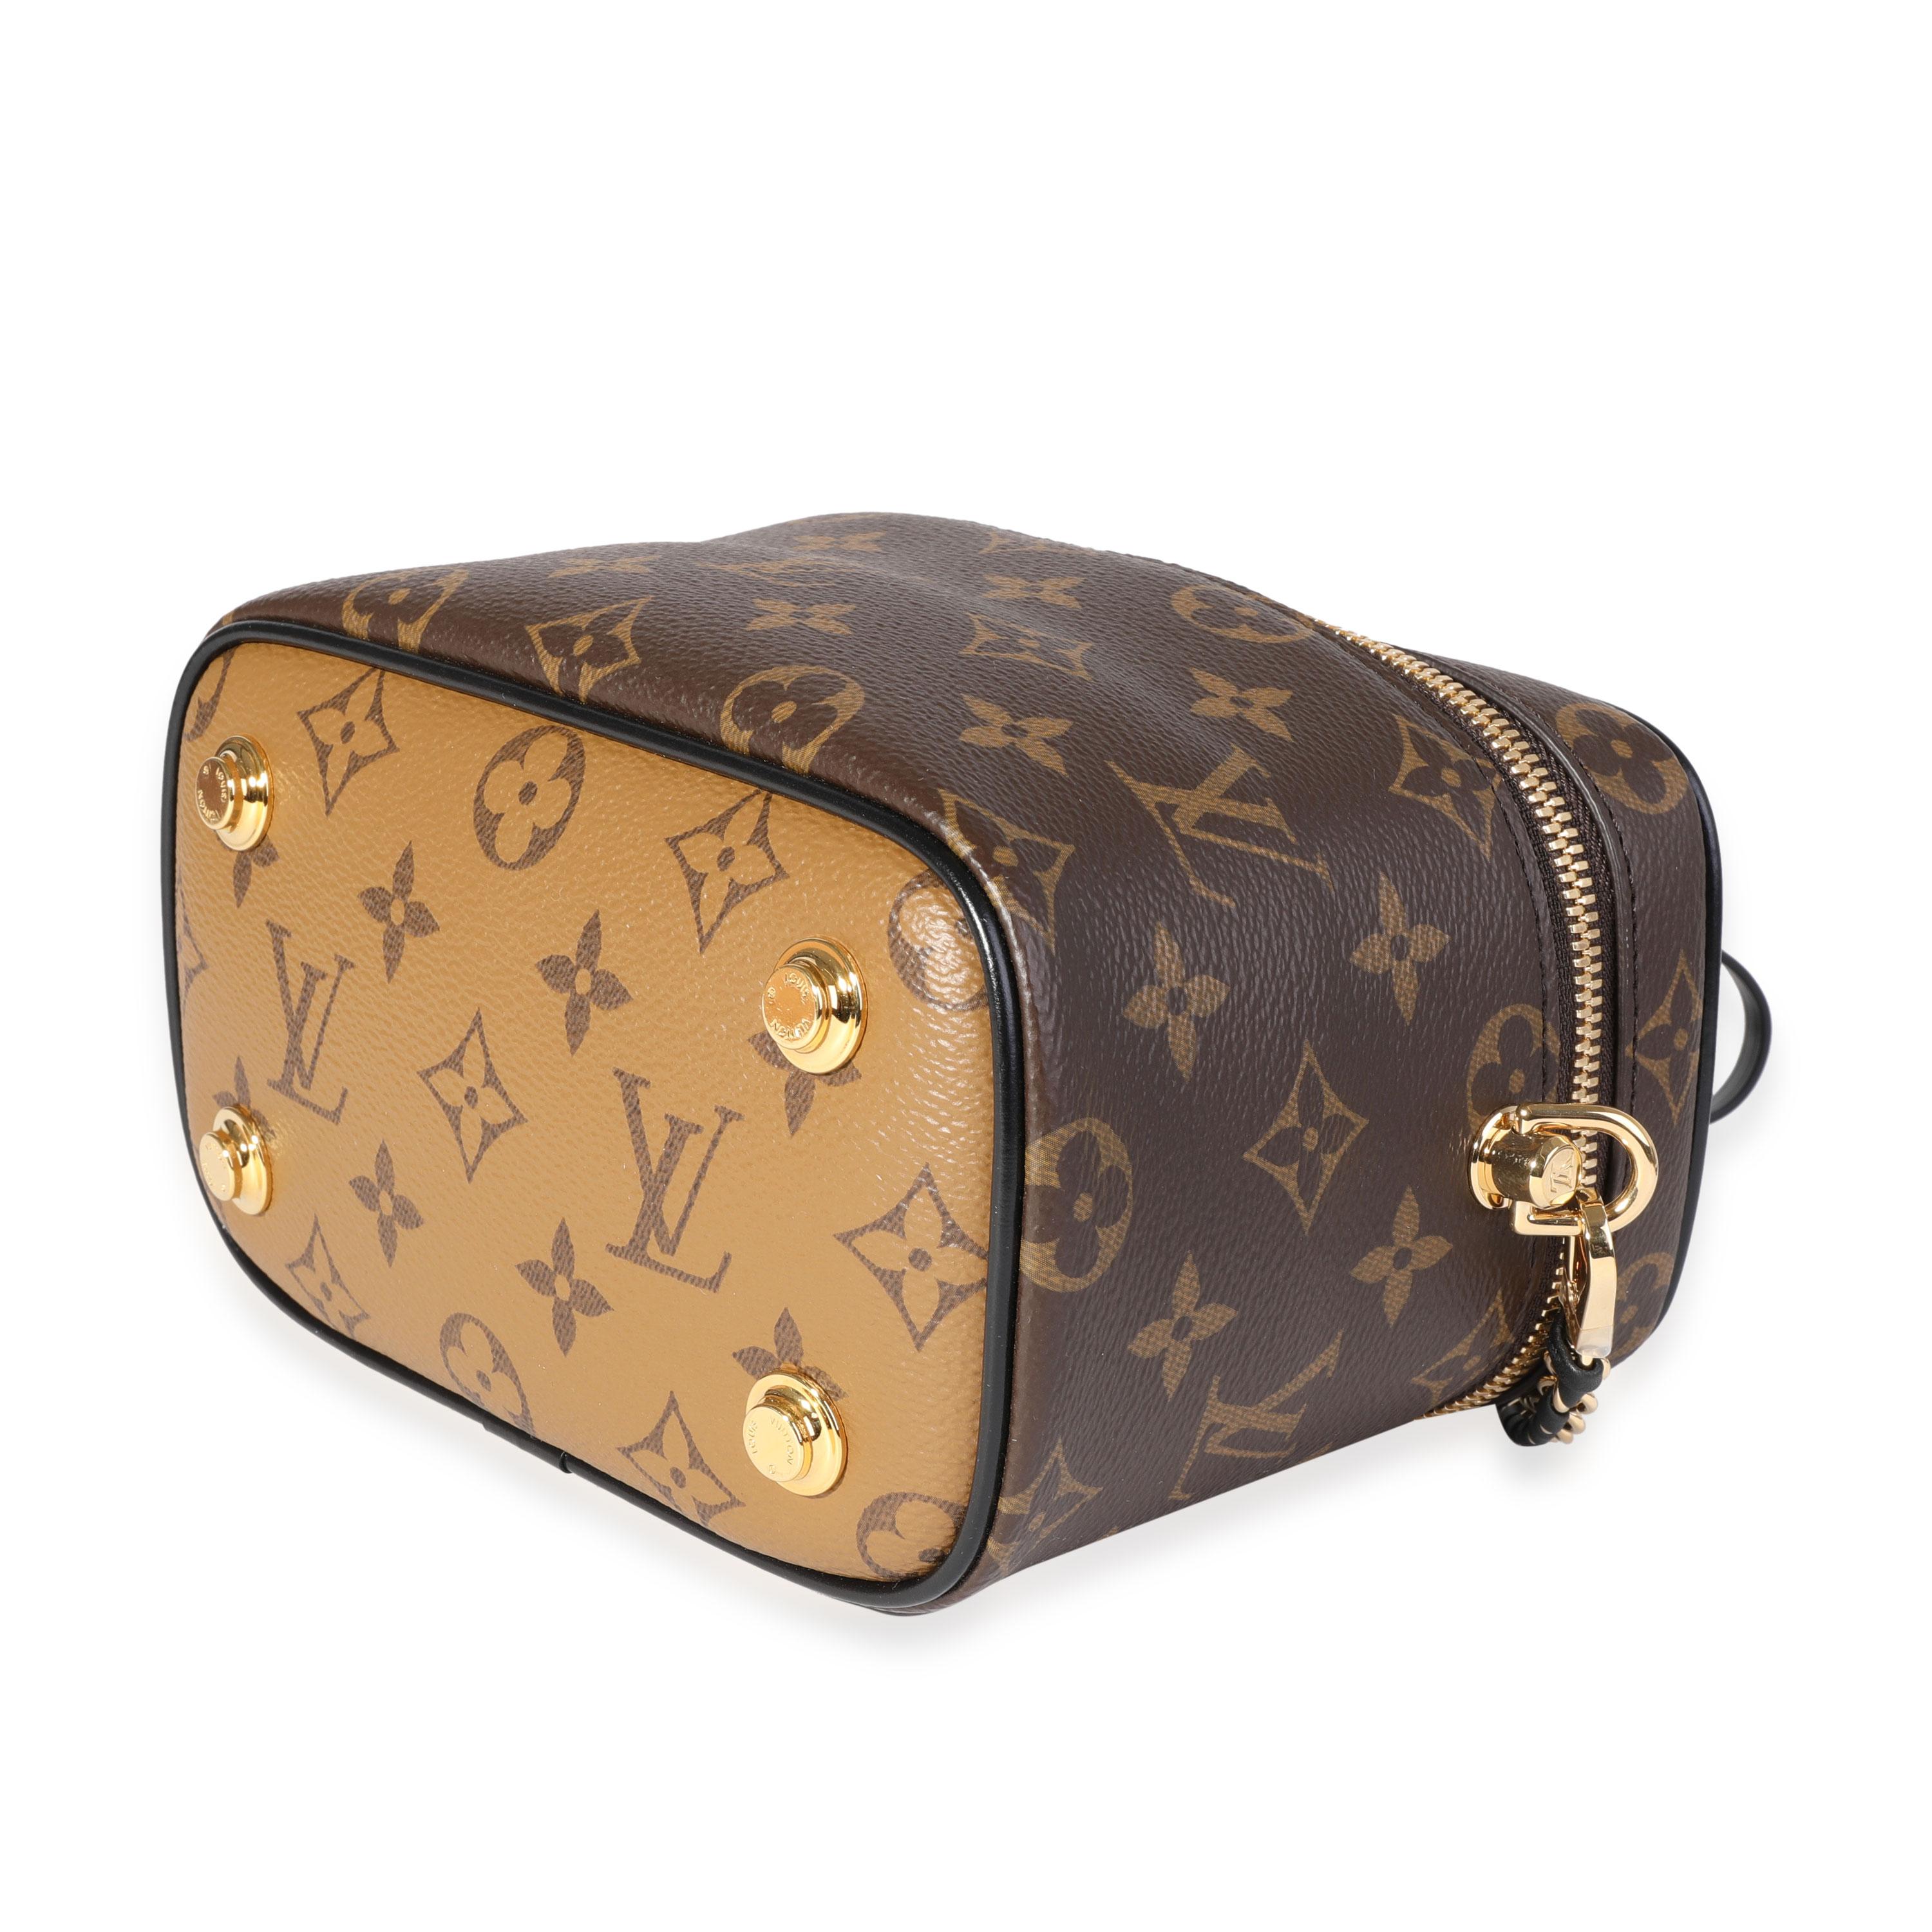 Listing Title: Louis Vuitton Monogram & Monogram Reverse Canvas Vanity PM
SKU: 120375
MSRP: 2840.00
Condition: Pre-owned 
Handbag Condition: Very Good
Condition Comments: Very Good Condition. Plastic on some hardware. Light scratching to hardware.